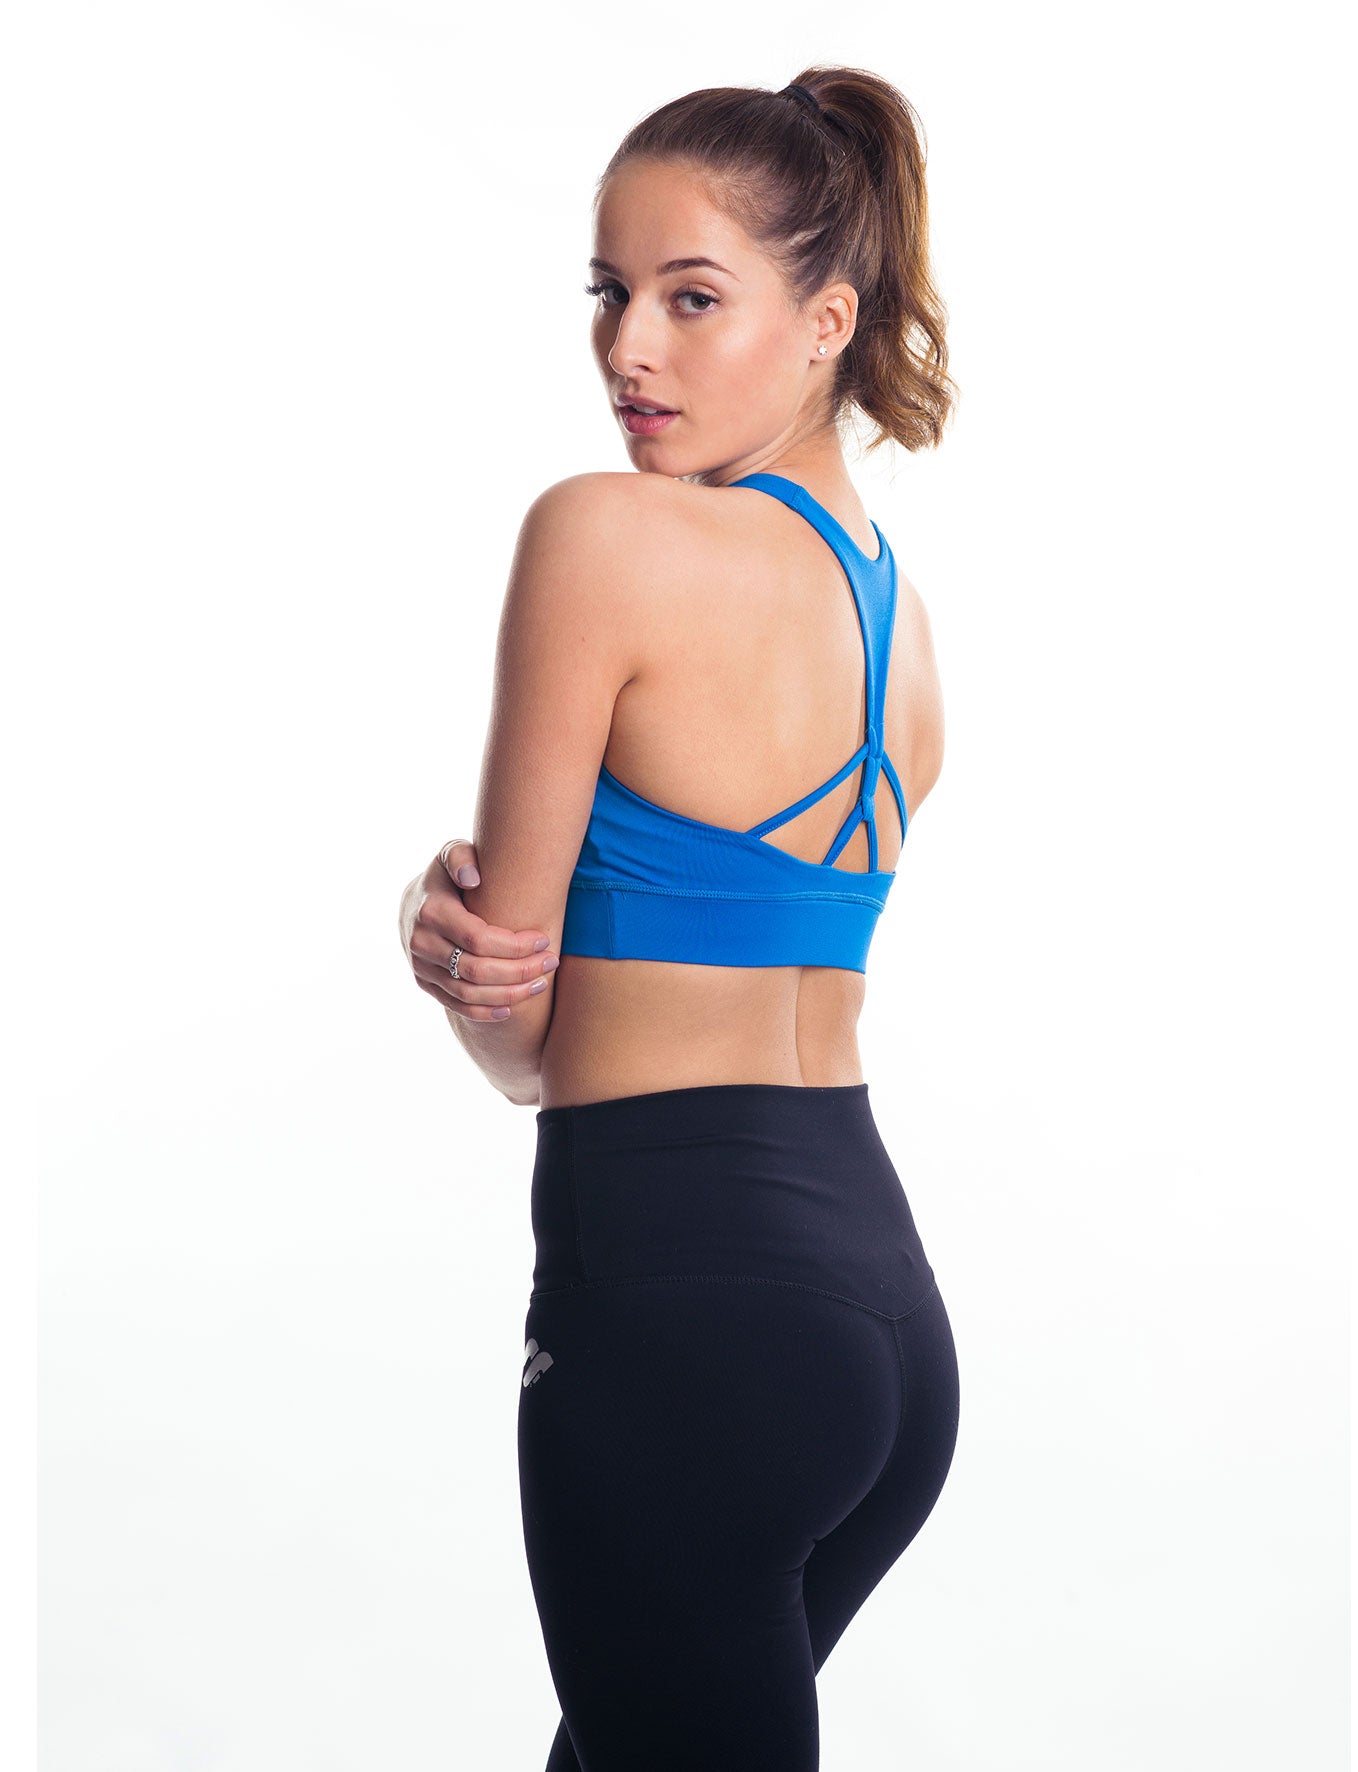 Xersion High Impact Racing Blue Sports Bra Medium - $23 New With Tags -  From Tiffany